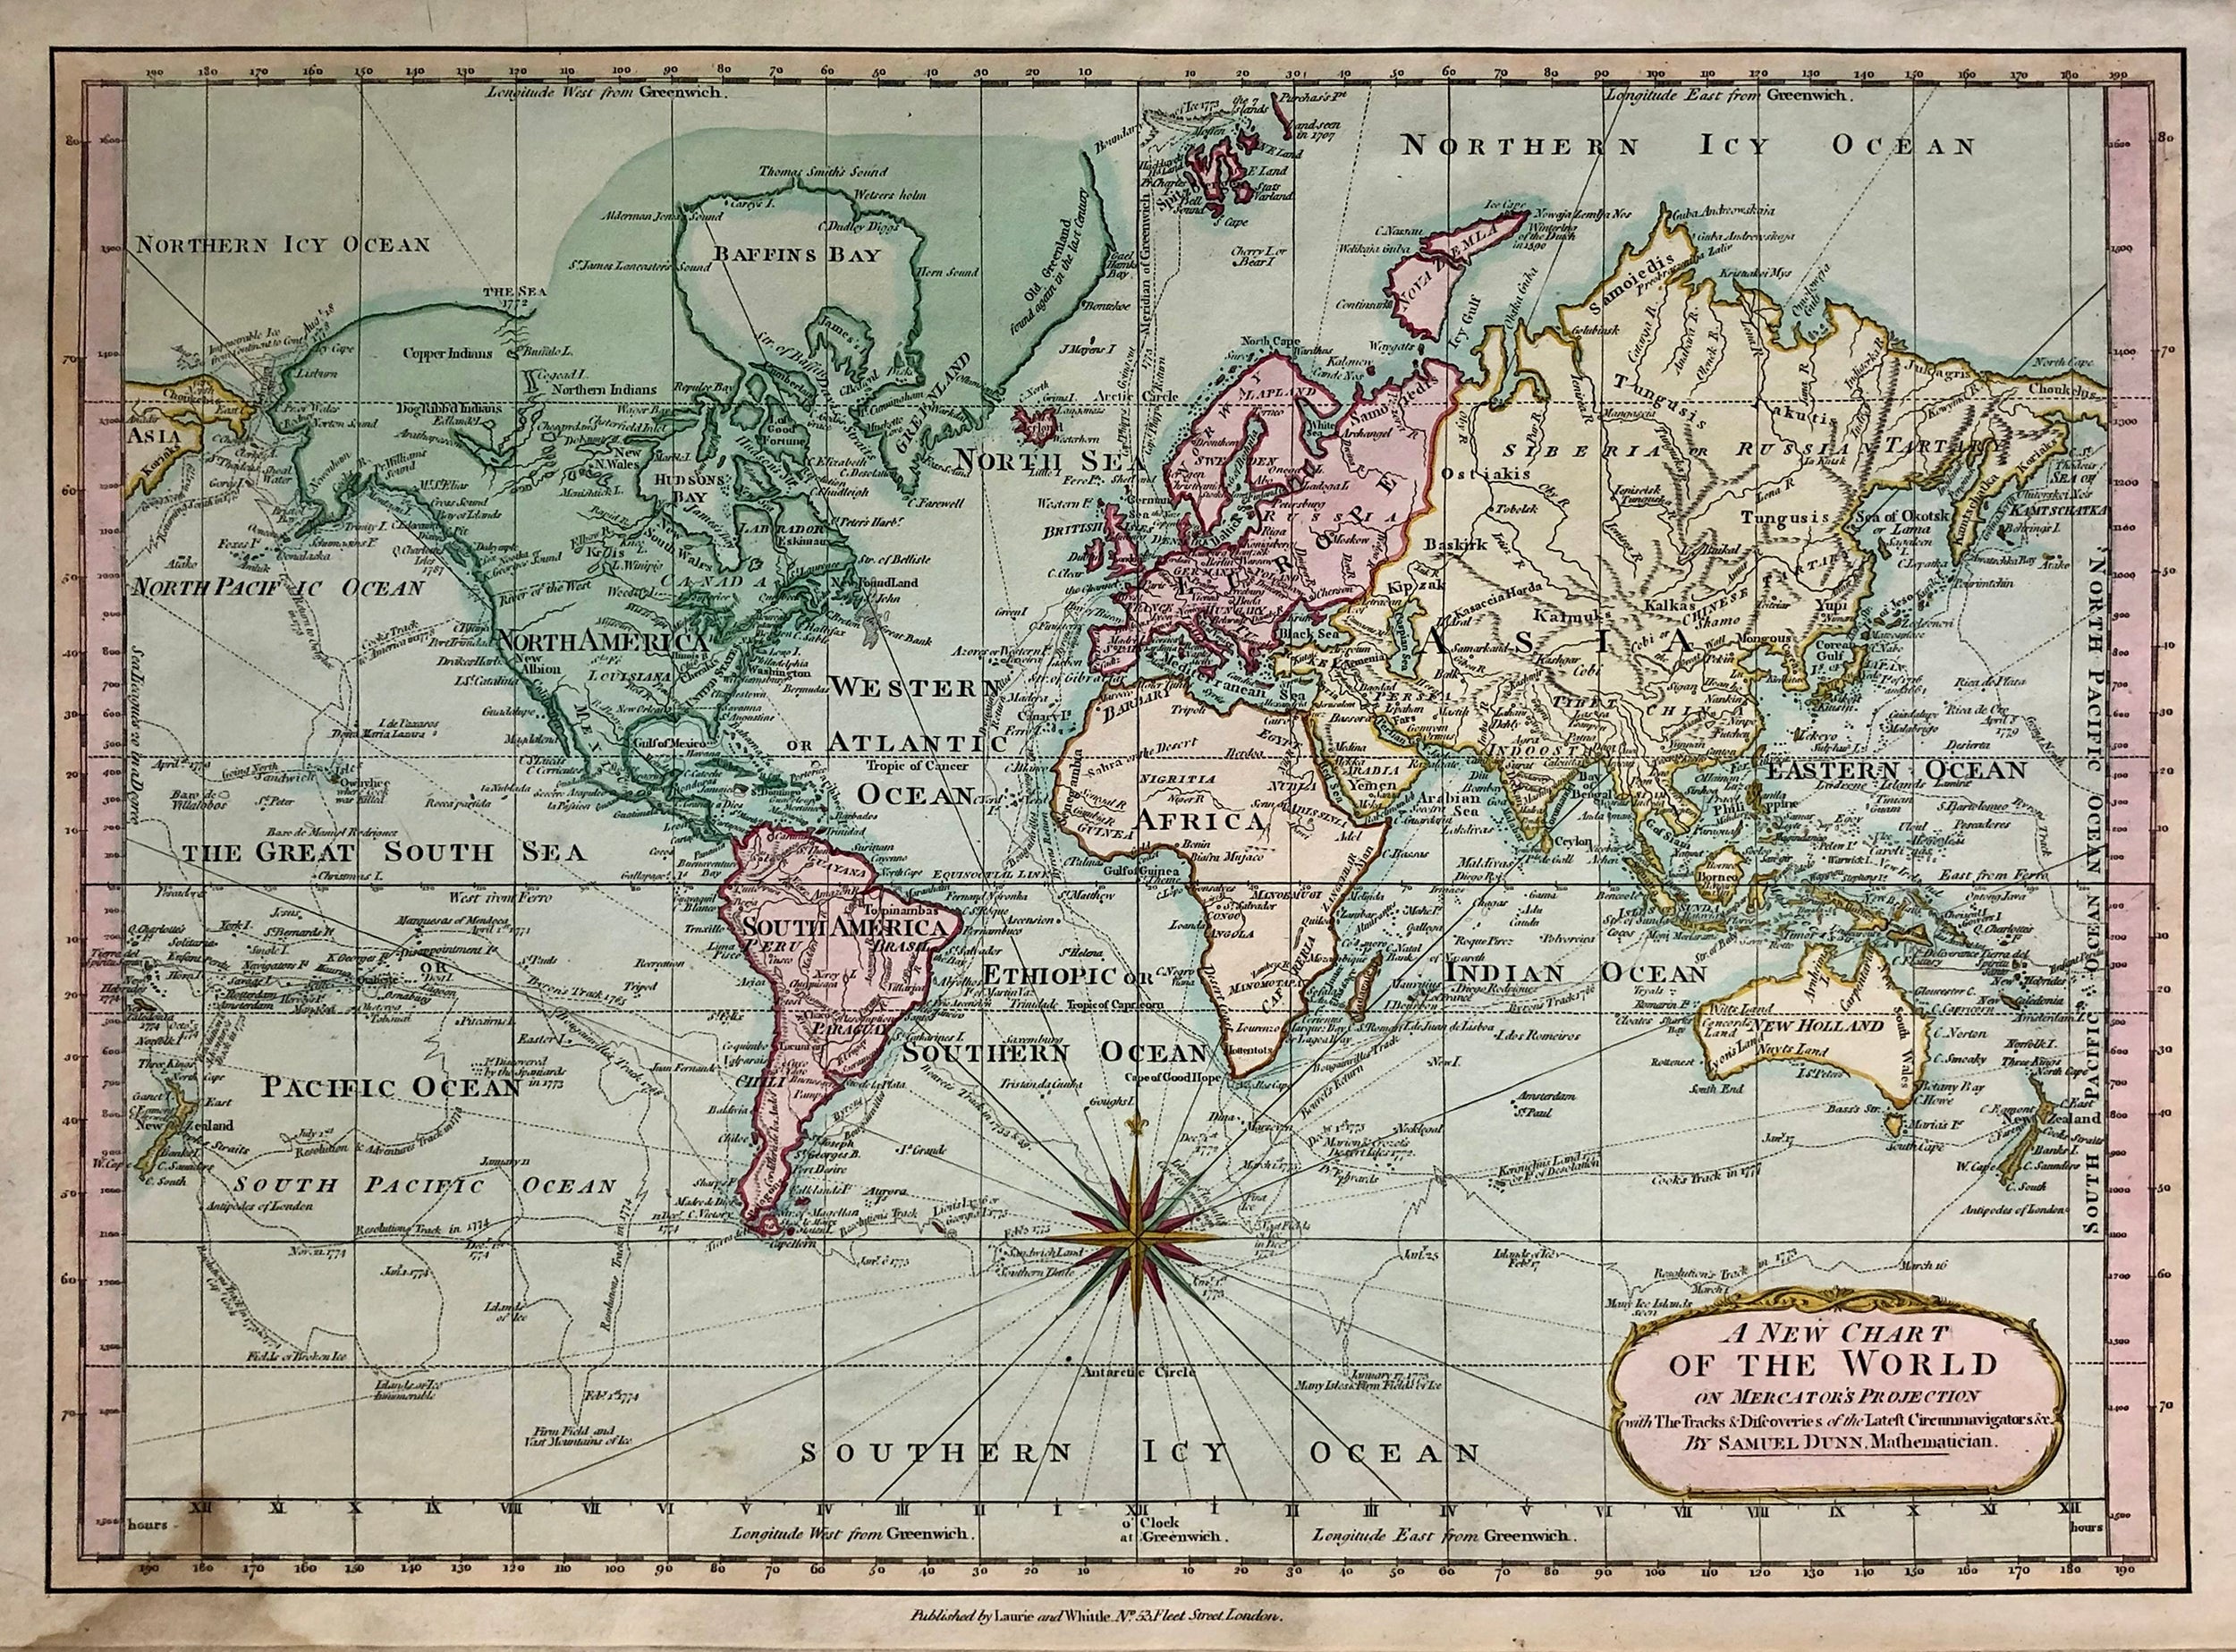 A NEW CHART OF THE WORLD ON MERCATOR'S PROJECTION with The Tracks & Discoveries of the Latest Circumnavigators &c. by SAMUEL DUNN, Mathematician.